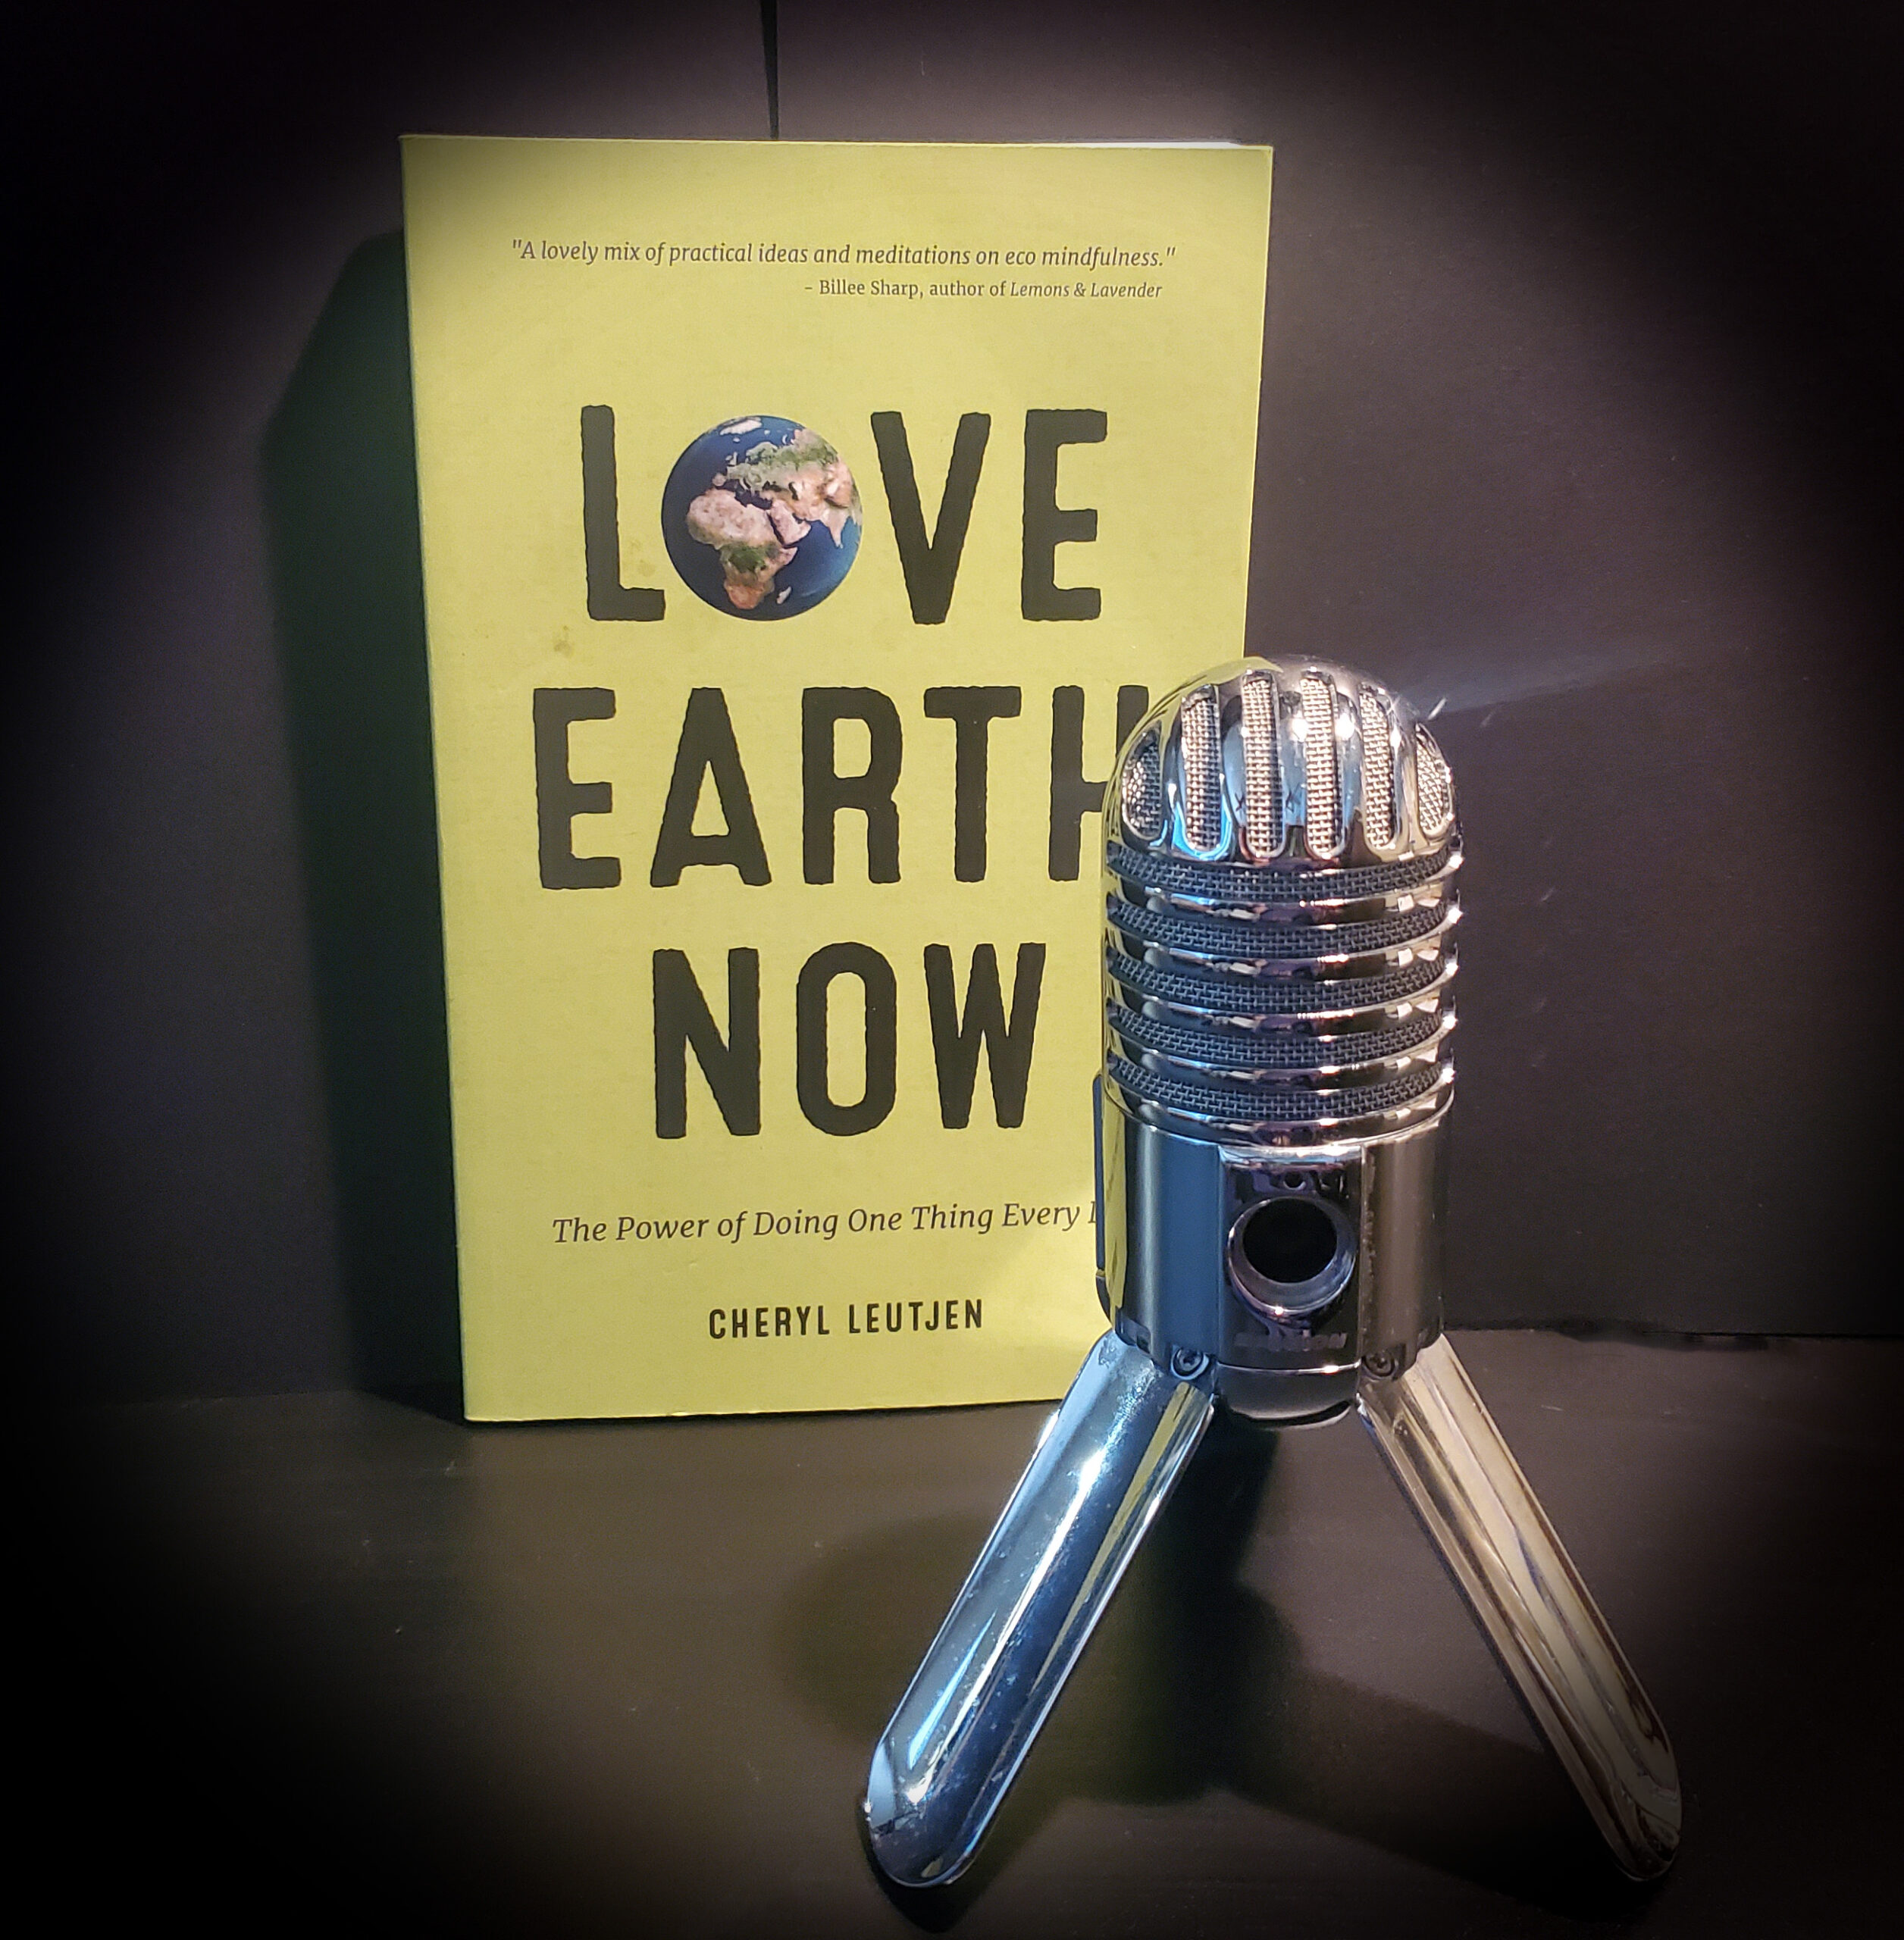 Love Earth Now book